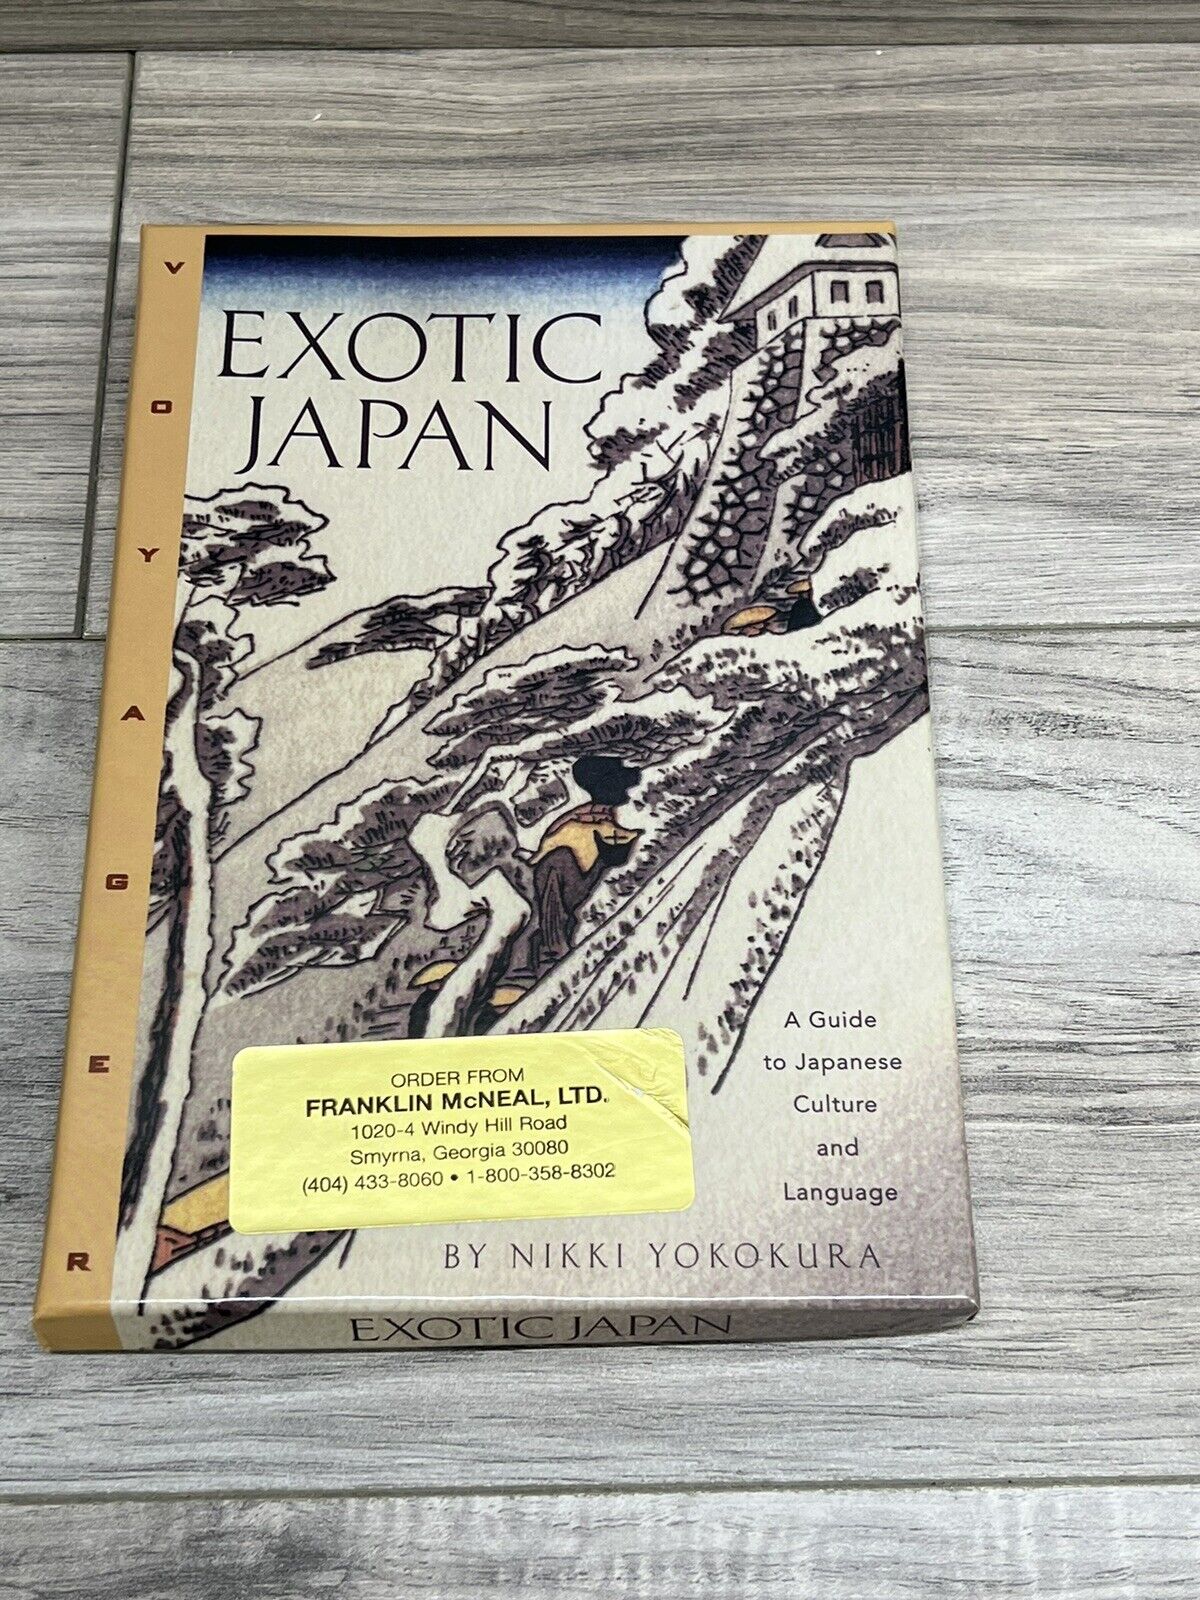 Exotic Japan -  Sealed Collectible CD-Rom, RARE ITEM, from Voyager Co.